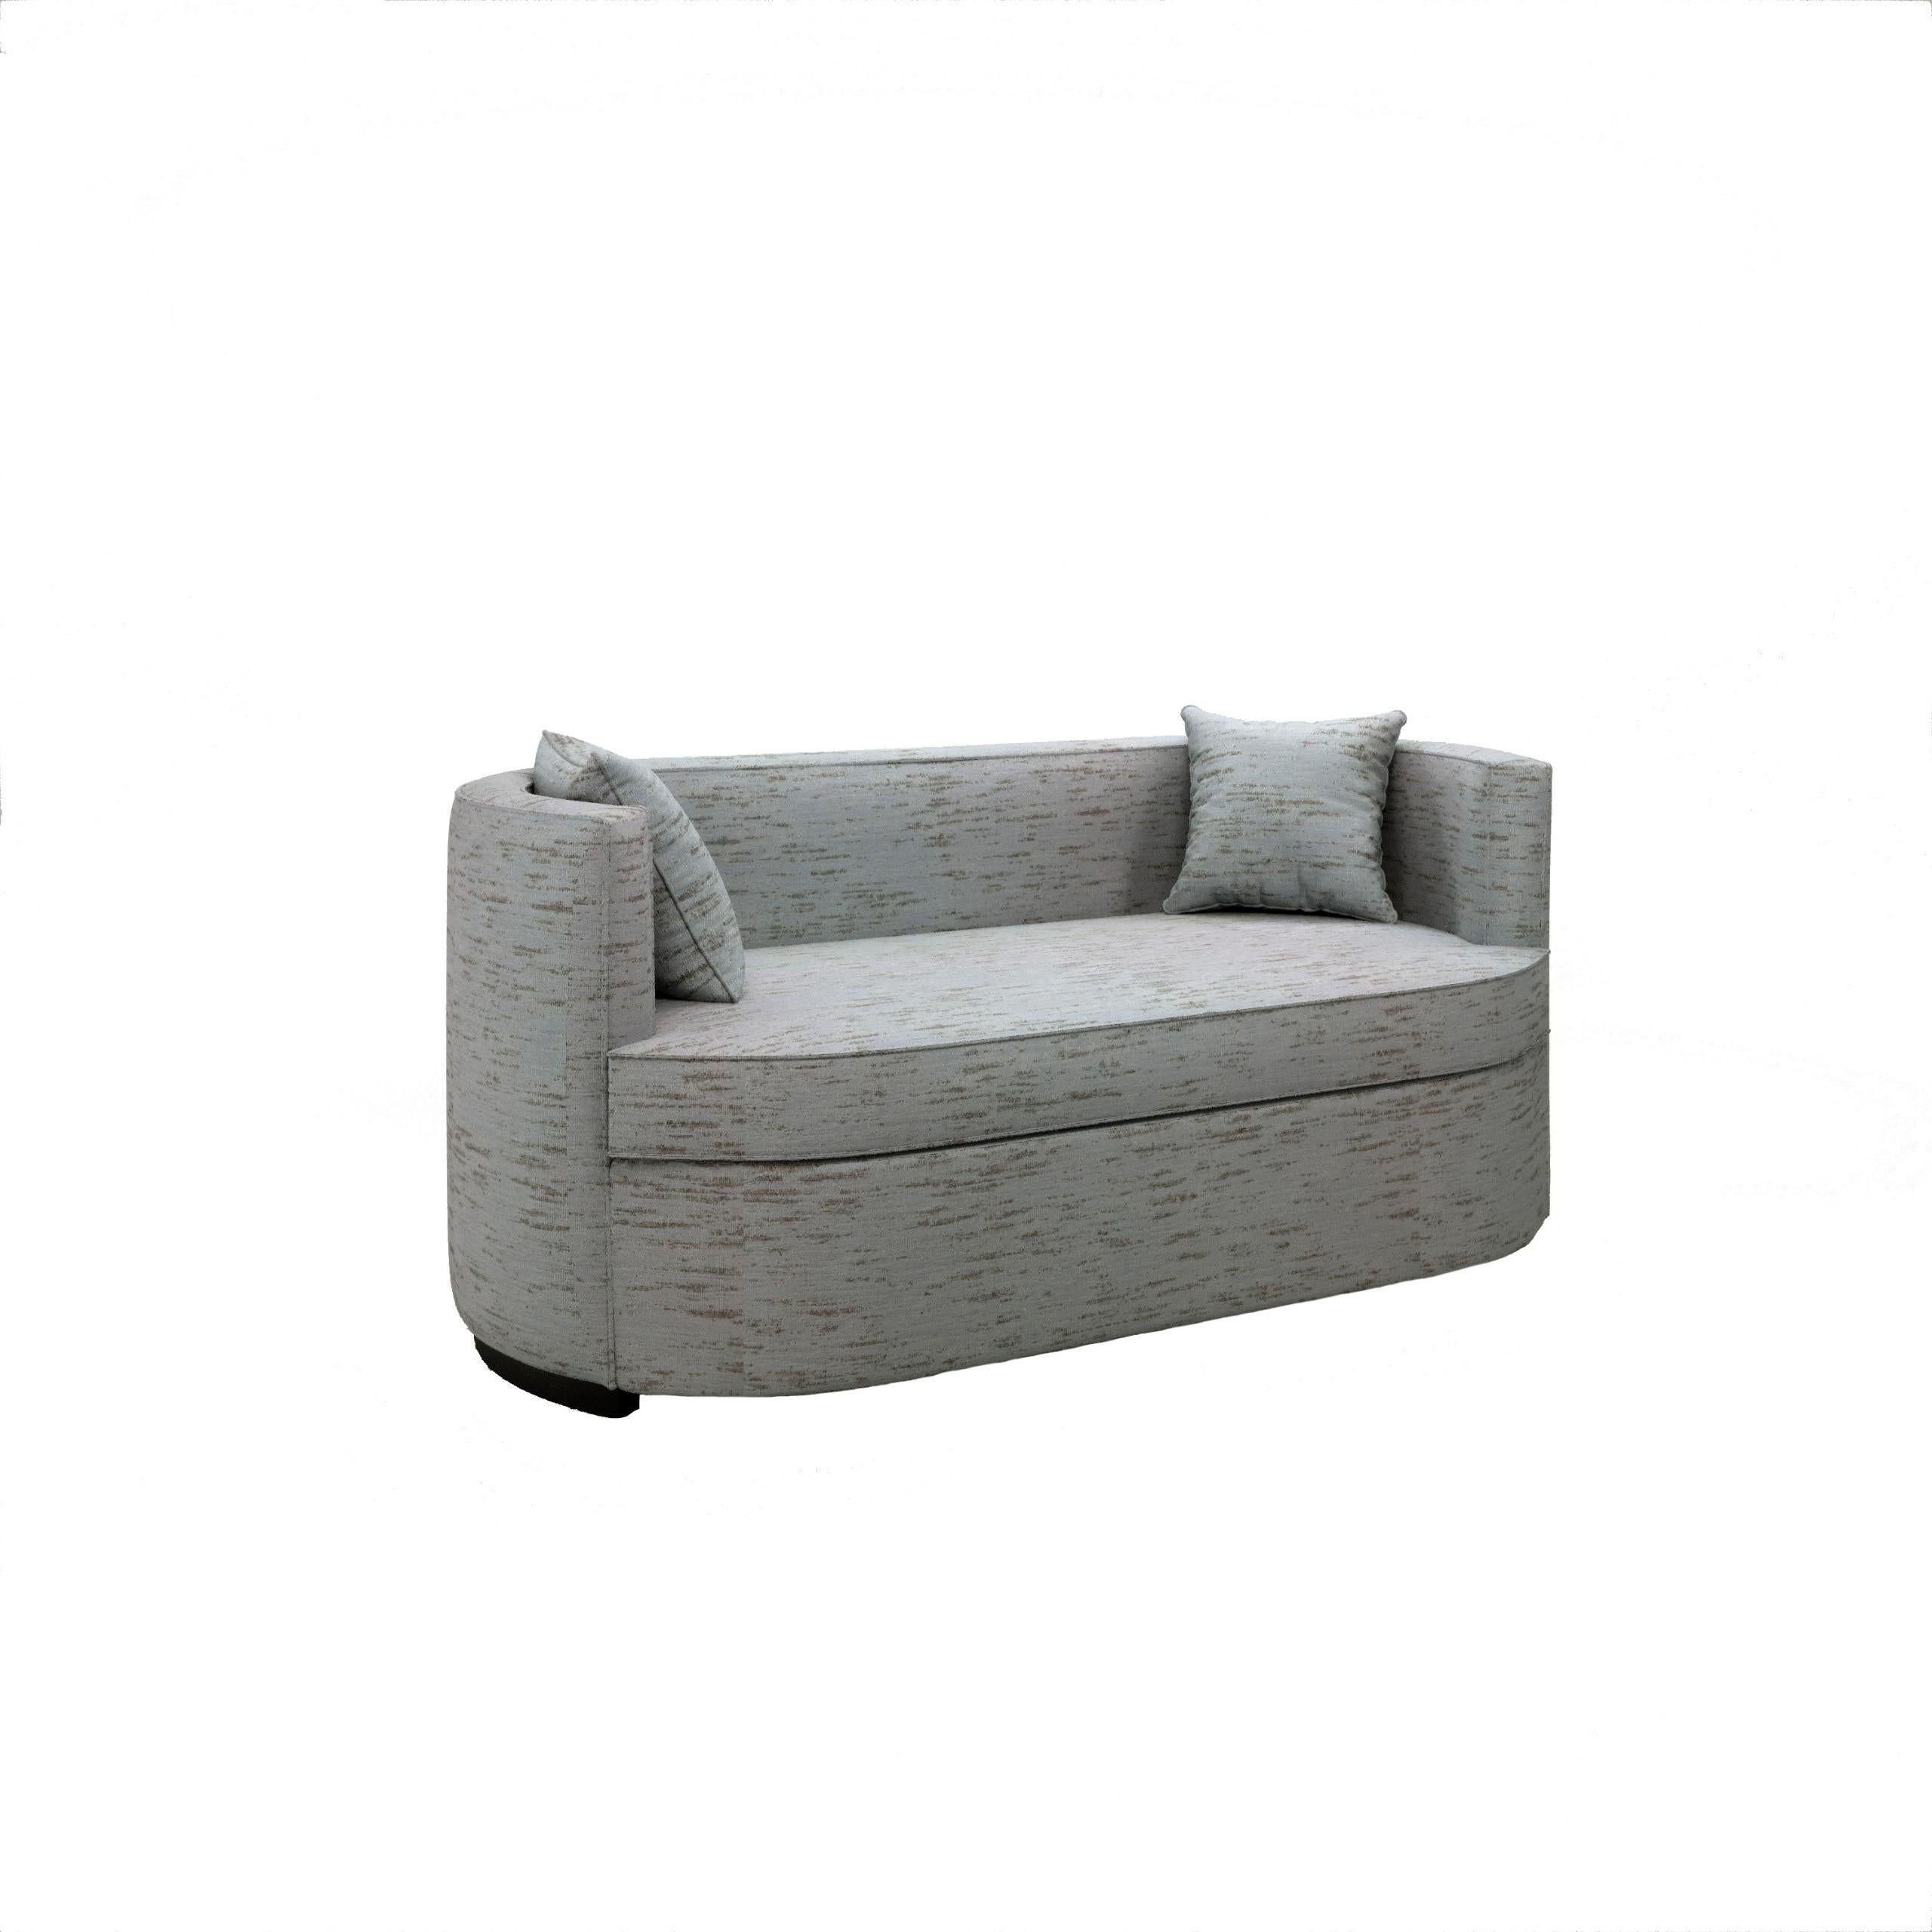 Portuguese Lima Sofa, upholstered in solid ash/beech plinth with stain finish For Sale